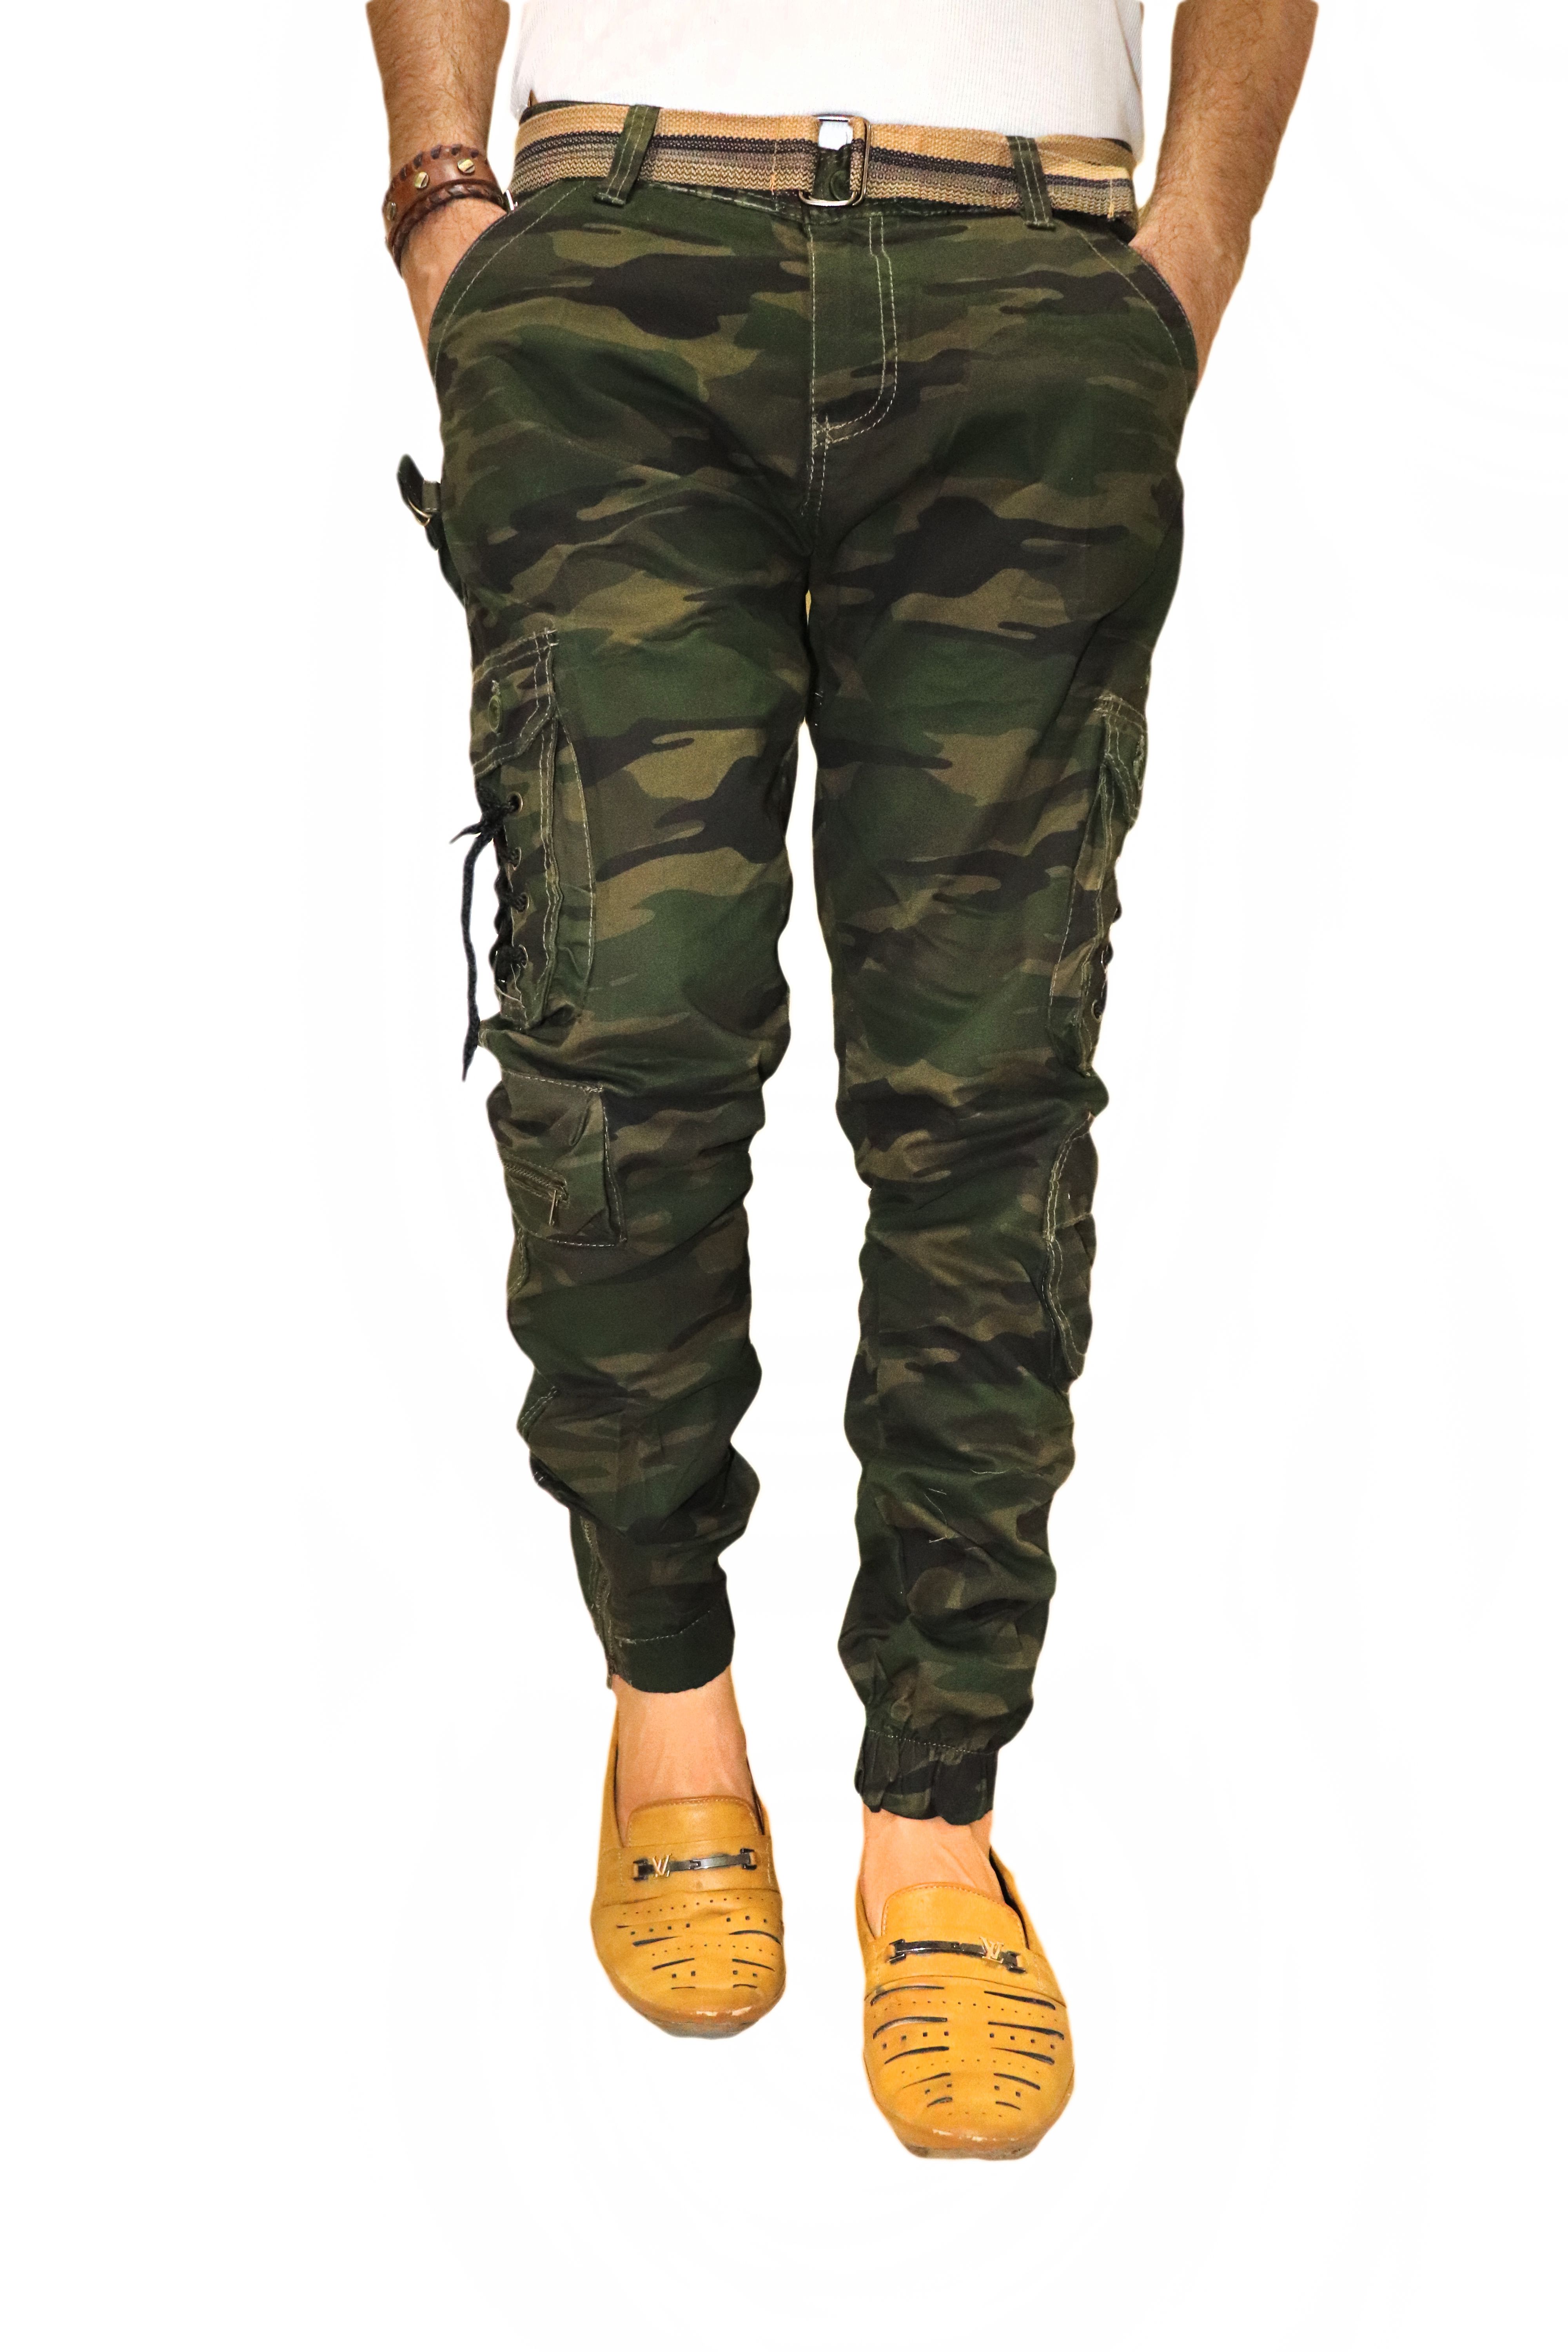 Buy Trustedsnap Multicolor Army Printed Cargo For Men's Online @ ₹999 ...